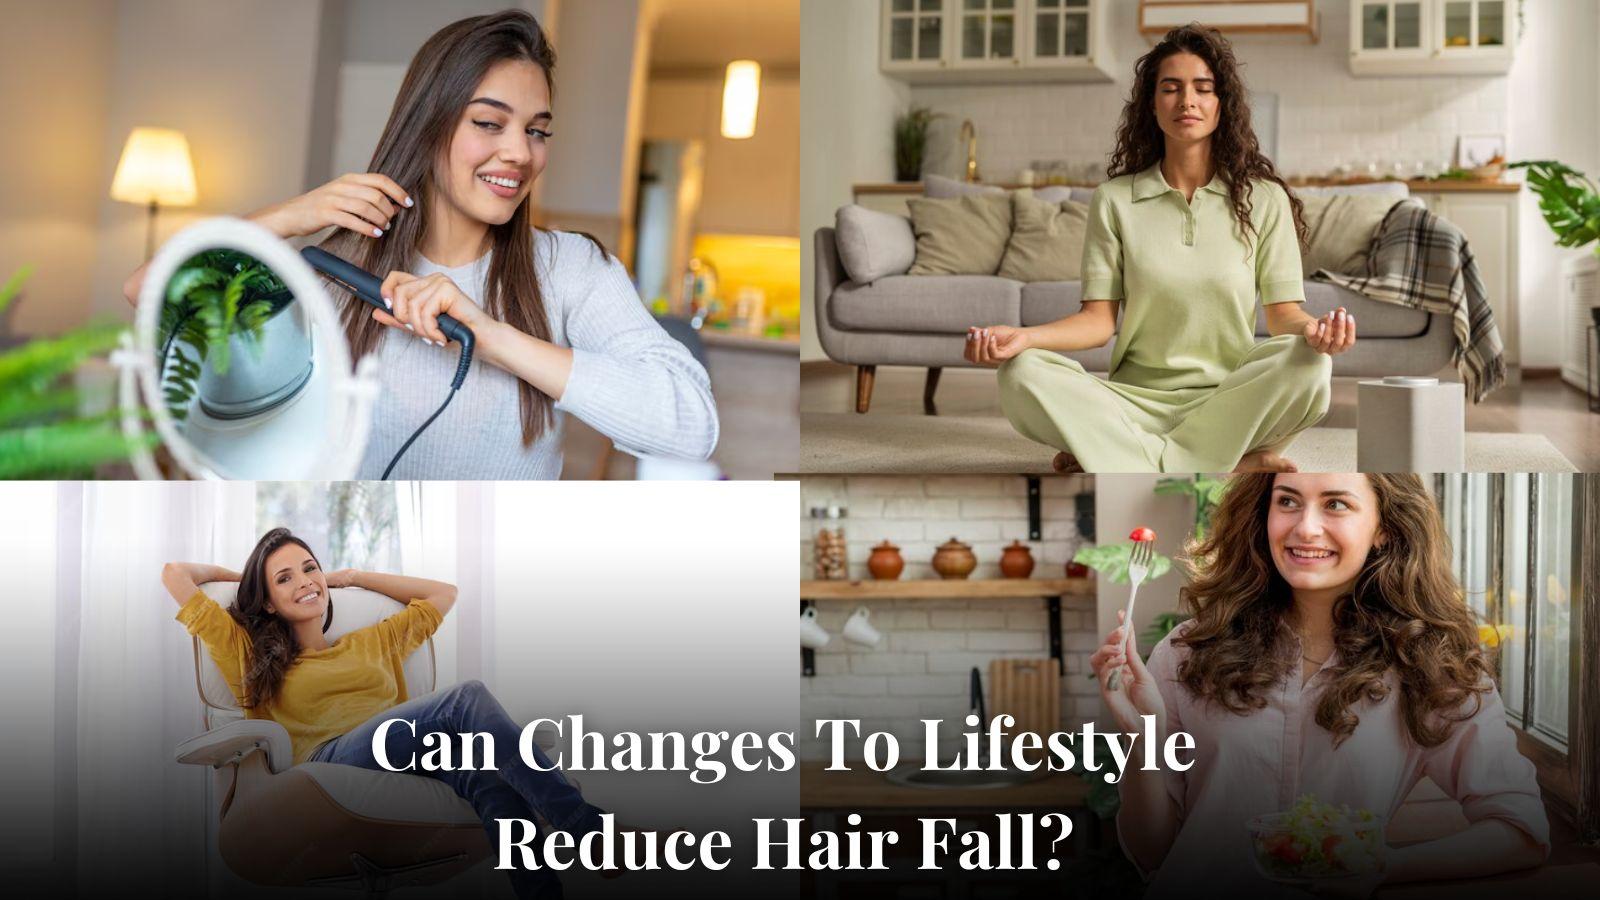 Can Changes To Lifestyle Reduce Hair Fall?